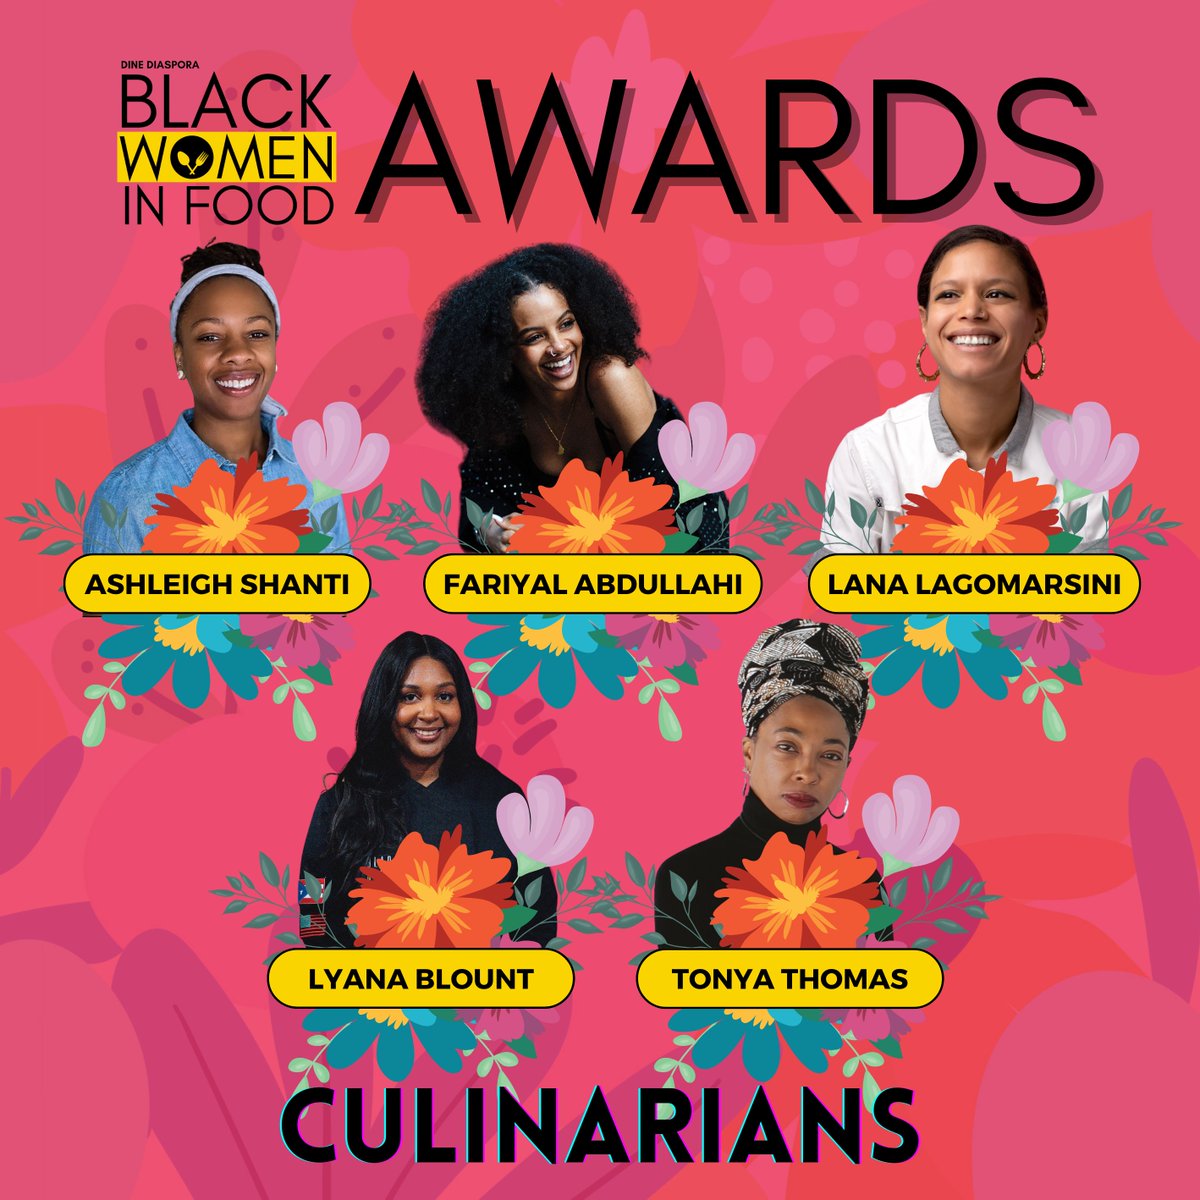 The Culinarians are the final ingredient in our #BlackWomenInFood Awards lineup, but their cooking is anything but an afterthought—it's the pièce de résistance! 👩🏿‍🍳 Explore the diverse flavors they're bringing to the dinner table at BlackWomenInFood.org/Awards.